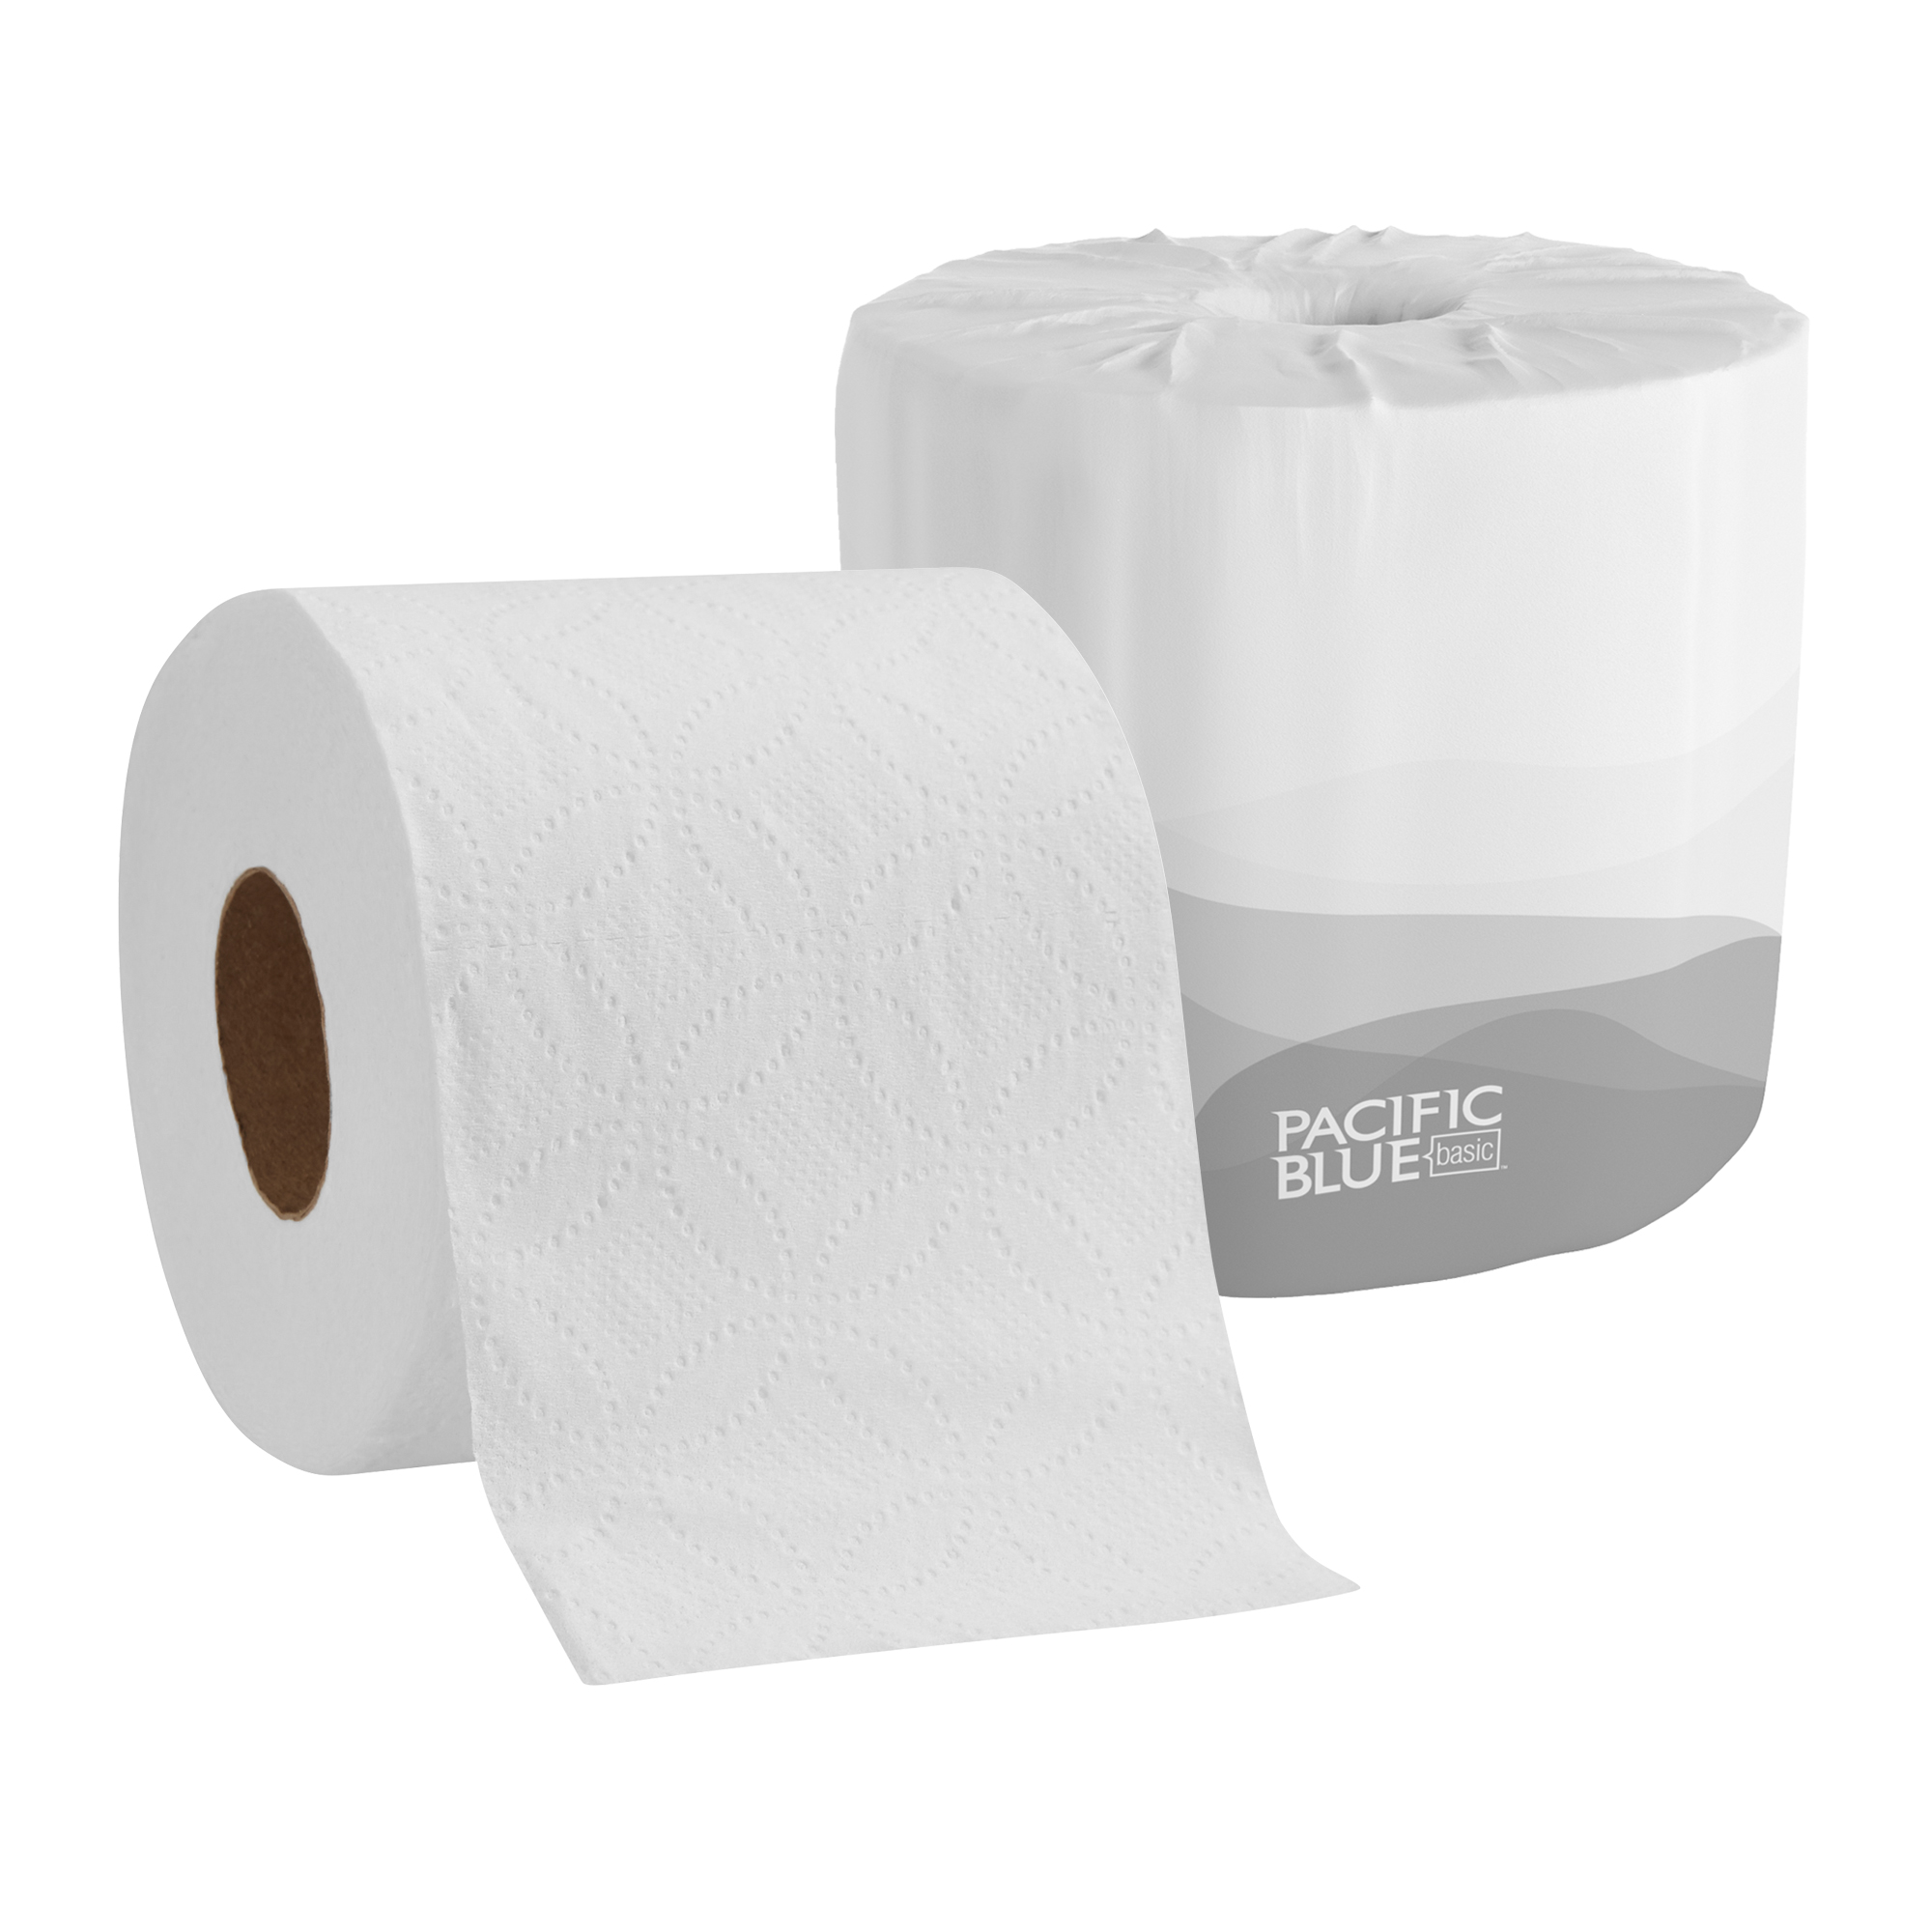 Georgia Pacific Professional Pacific Blue Basic Bathroom Tissue, Septic Safe, 2-Ply, White, 550 Sheets/Roll, 80 Rolls/Carton -GPC1988001 - image 2 of 7